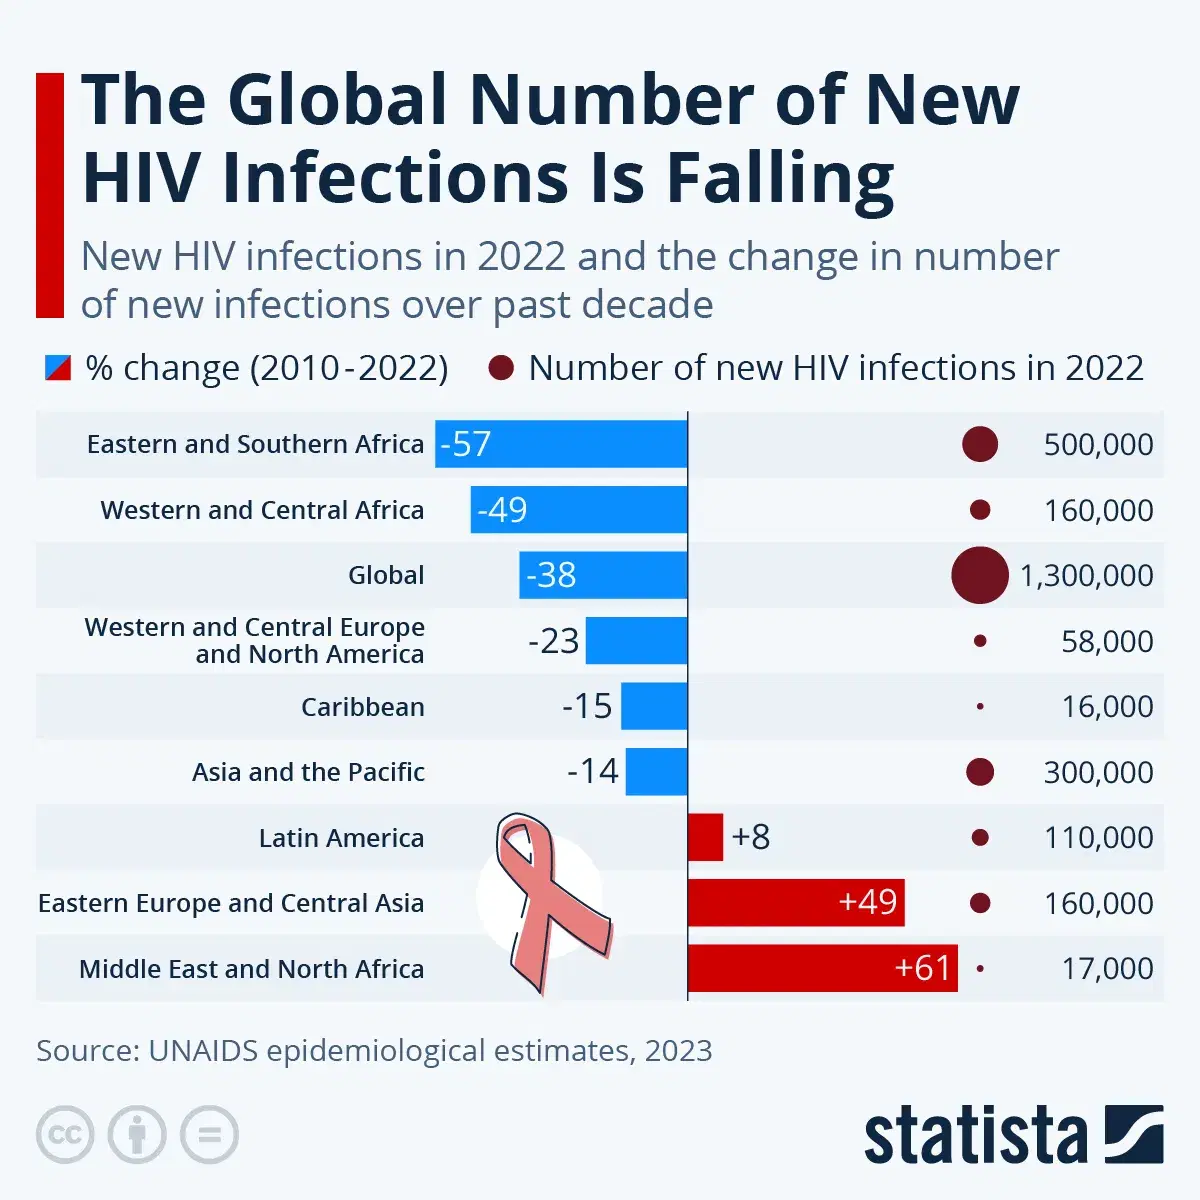 The Global Number of New HIV Infections Is Falling